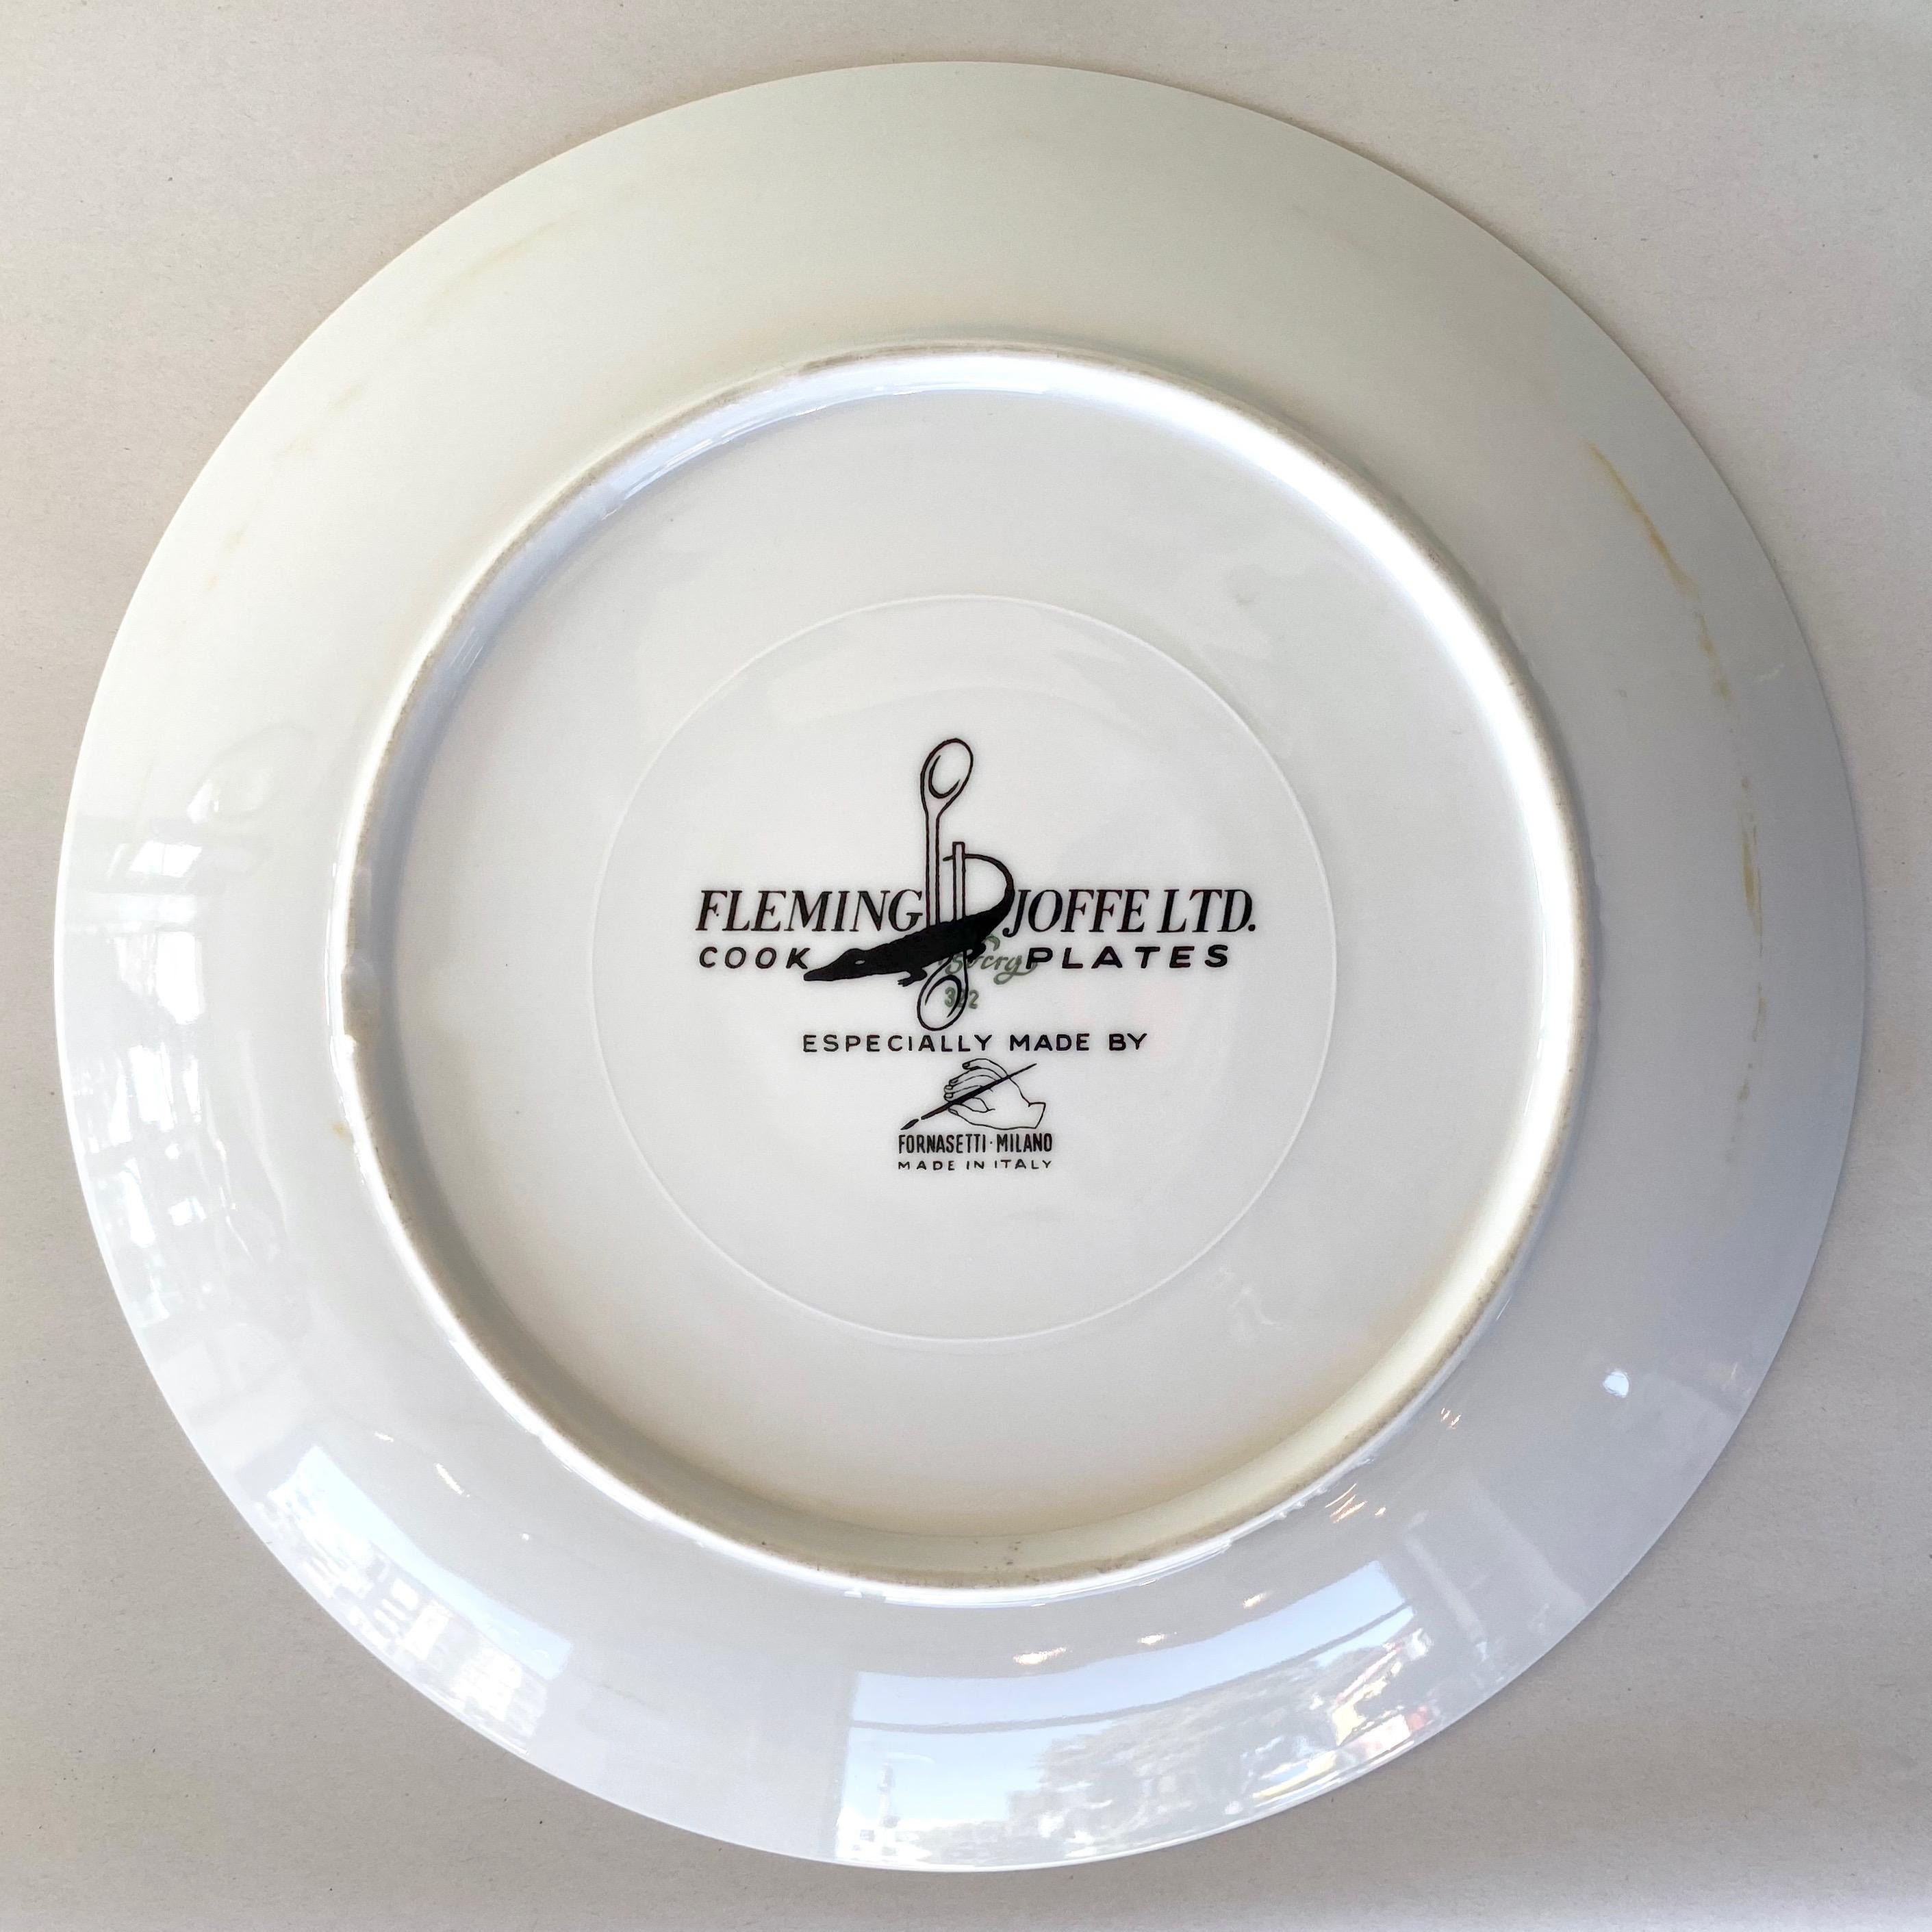 Fornasetti for Fleming Joffe “Iguana and Chicken Breasts” Recipe Plate, 1960s For Sale 4